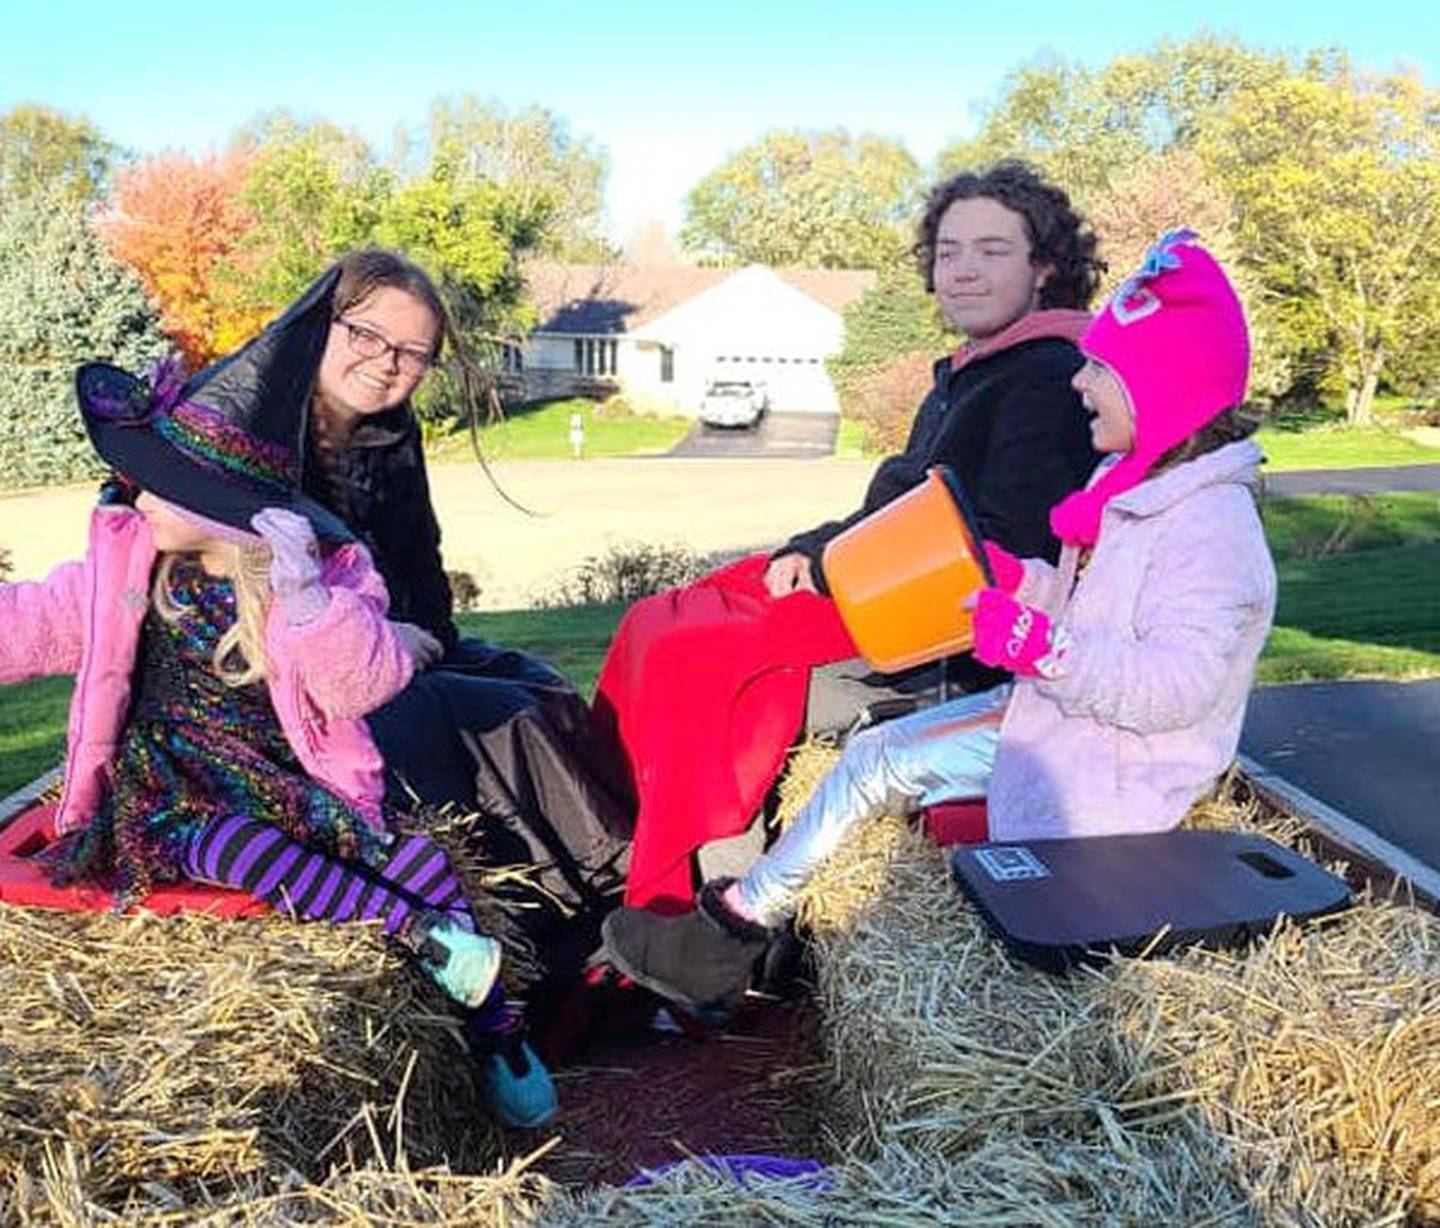 The Clegg family celebrates Halloween together. Tynisha and Cary Clegg have three biological children of their own, ages 15, 17 and 22, and they will adopt two siblings they have been fostering.